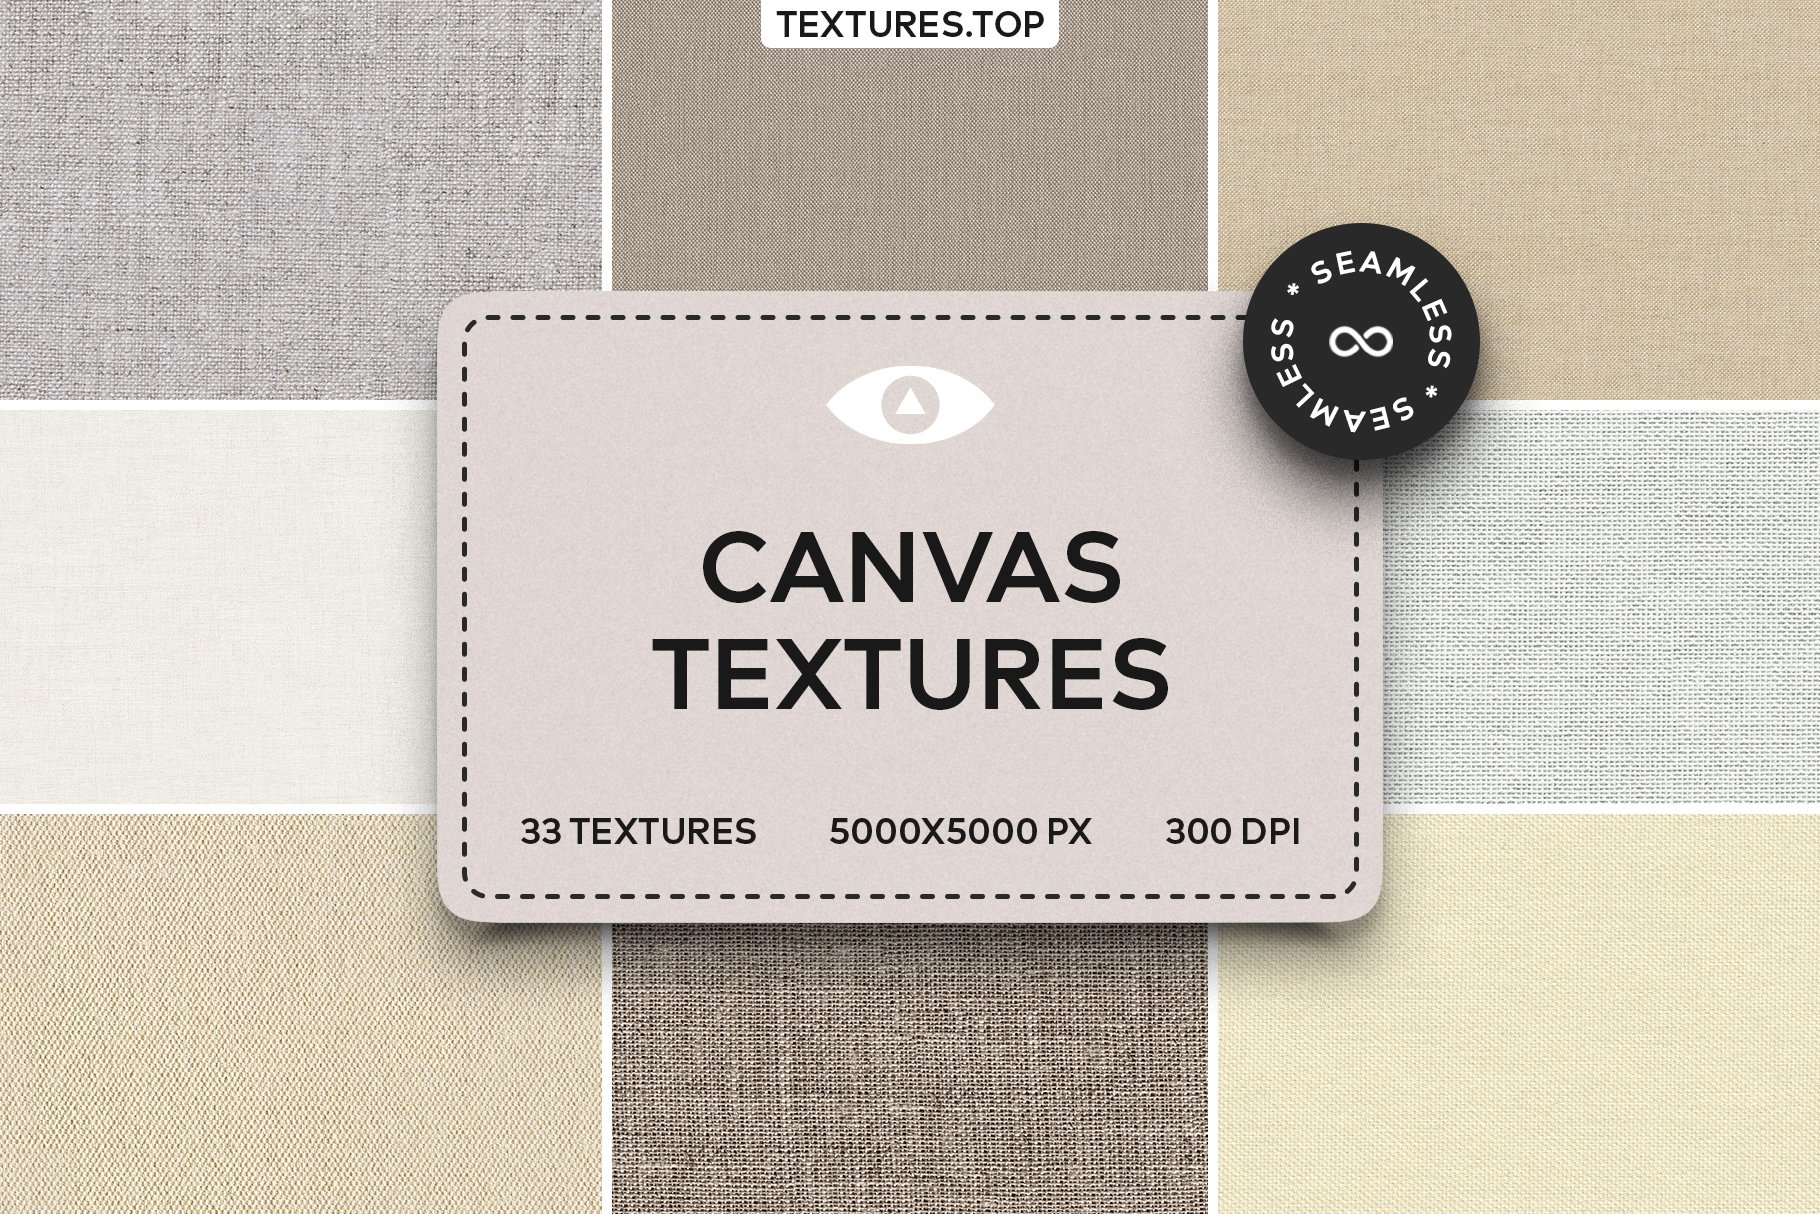 33 Seamless Canvas Texture Pack cover image.